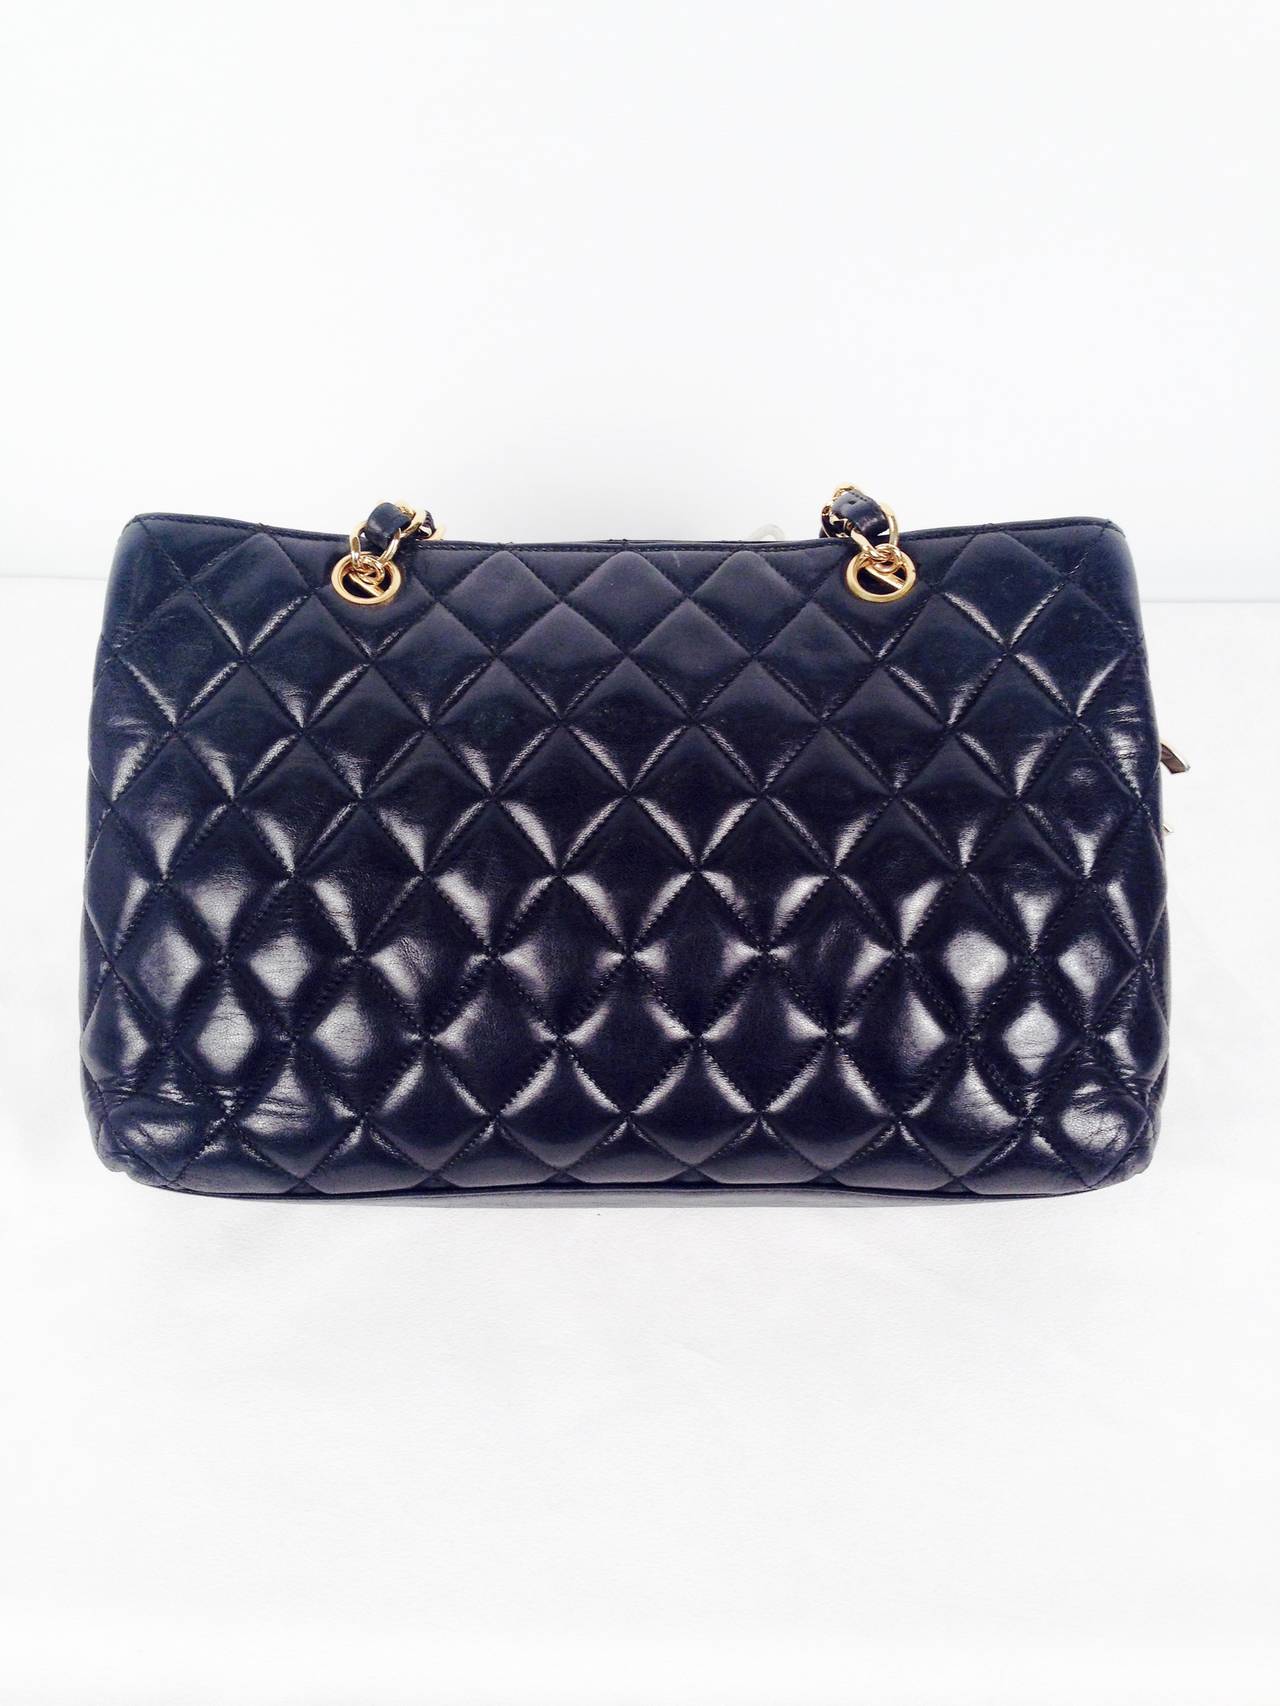 Vintage Chanel Black Quilted Lambskin Shoulder Bag In Excellent Condition For Sale In Palm Beach, FL